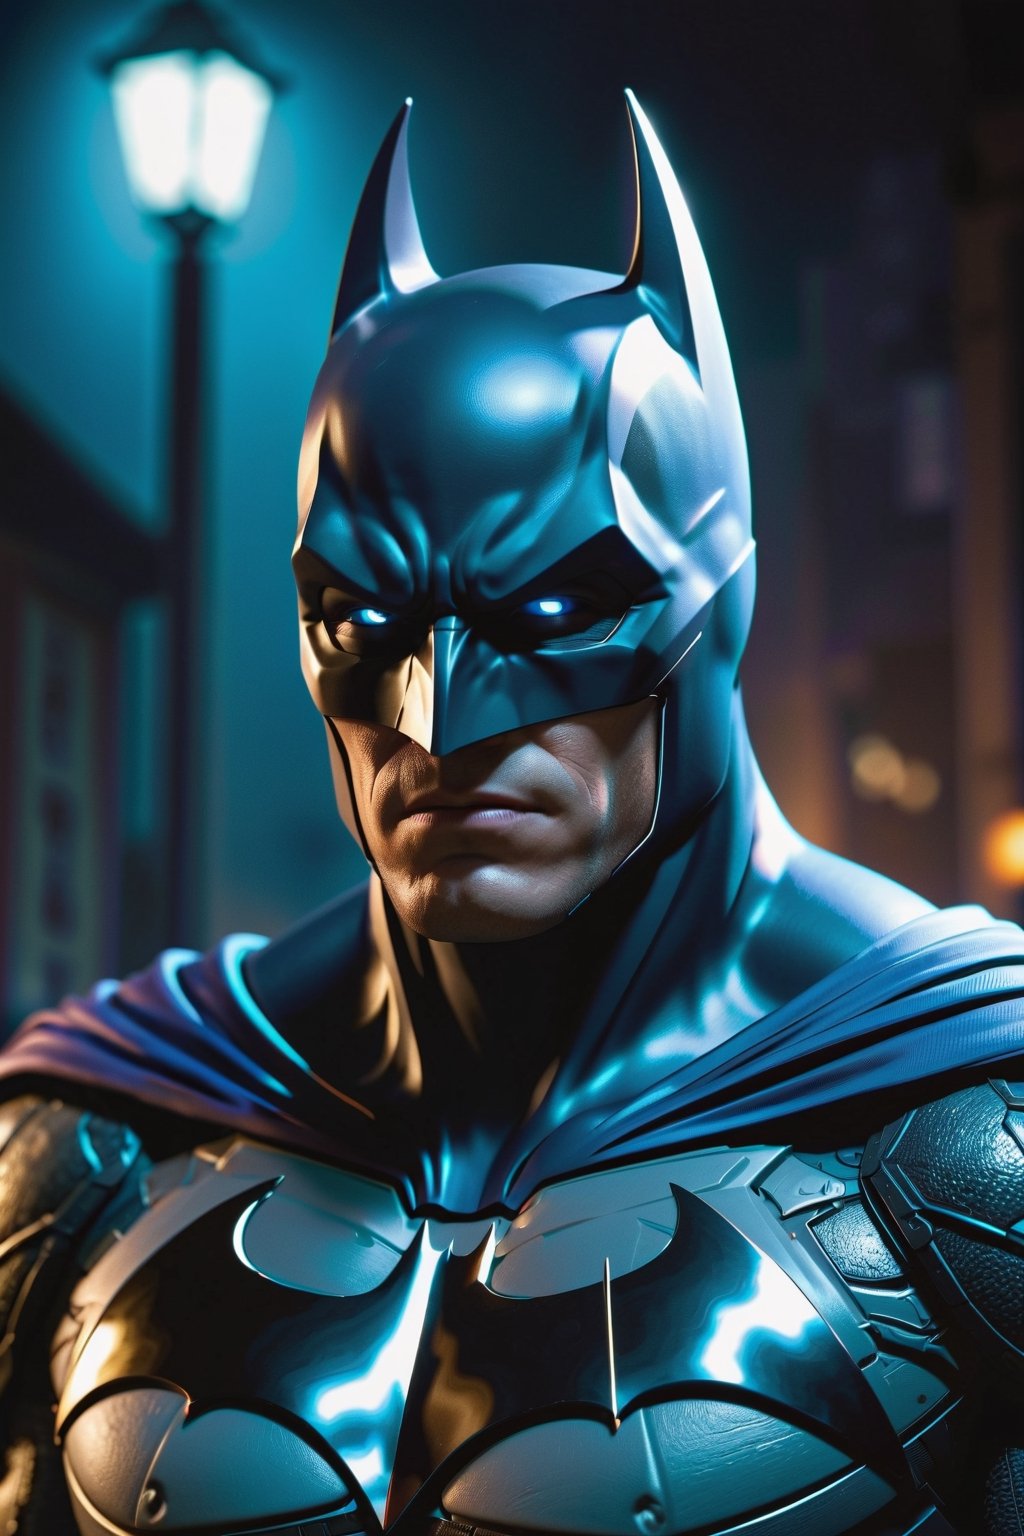 The Dark batman with black Evil Light eyes and lighting Blue thunder Dc , scary, Classic Academia, Flexography, ultra wide-angle, Game engine rendering, Grainy, Collage, analogous colors, Meatcore, infrared lighting, Super detailed, photorealistic, food photography, Cycles render, 4k,  laugh, Leonardo style ,cinematic  moviemaker style